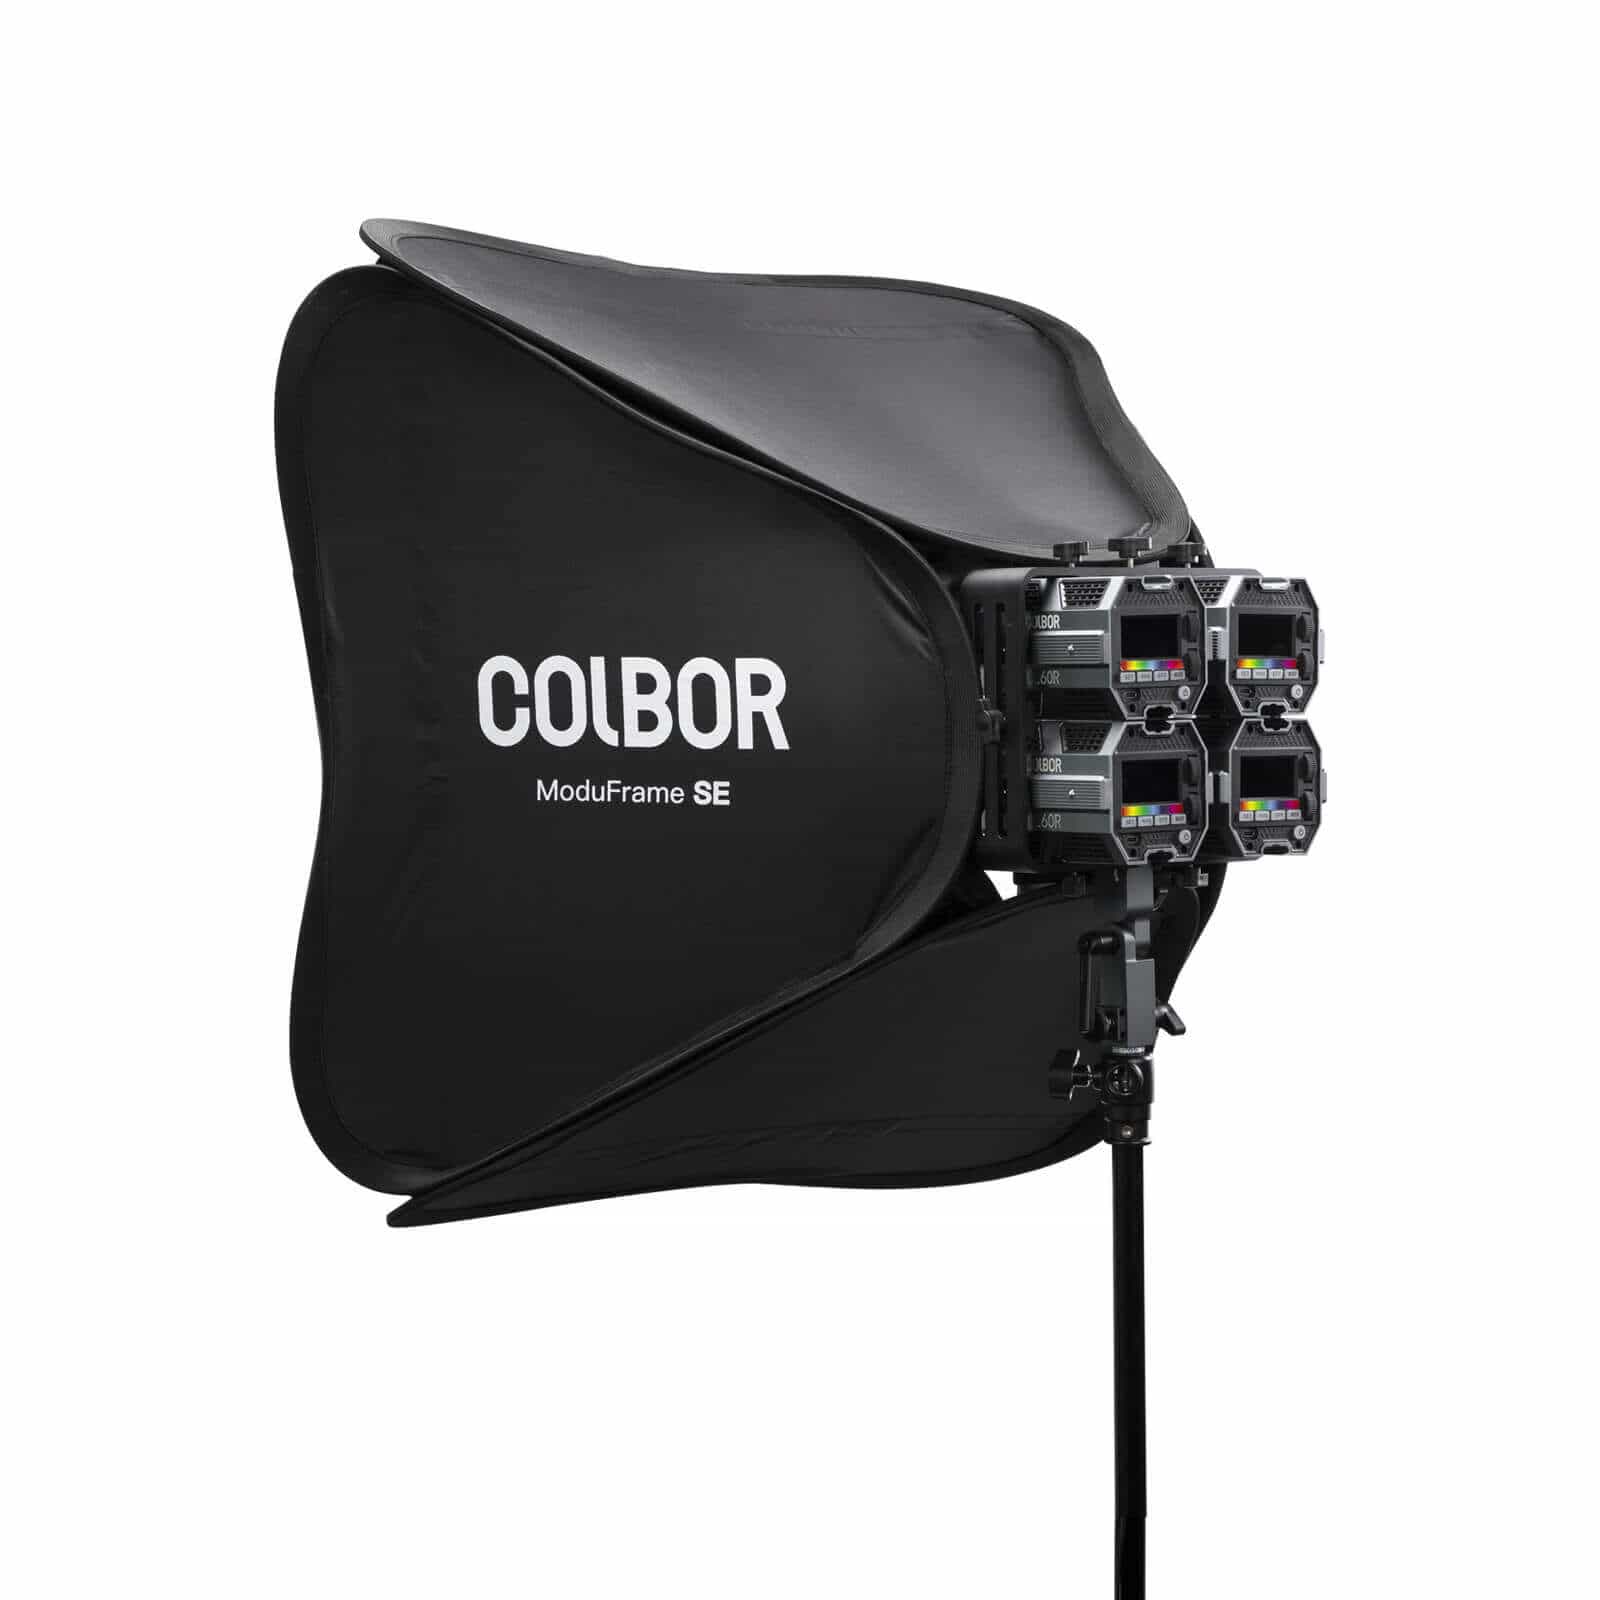 COLBOR ModuFrame SE can soften the lighting from a 4-light setup.